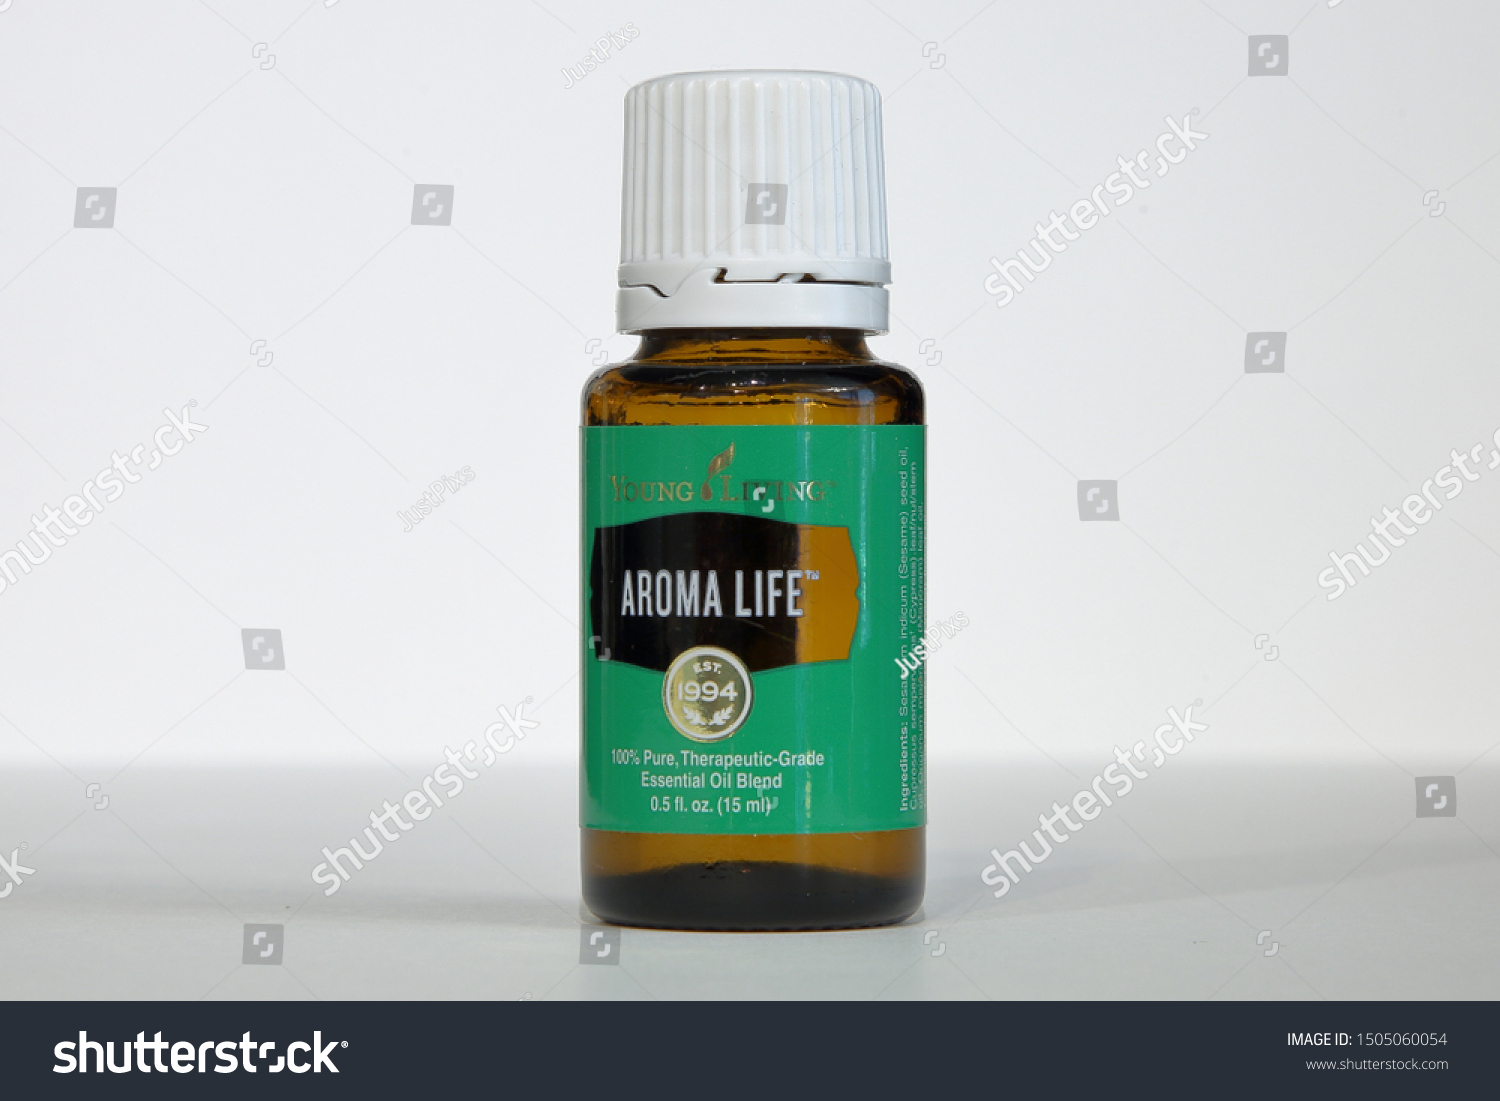 Living aroma life young Review YL